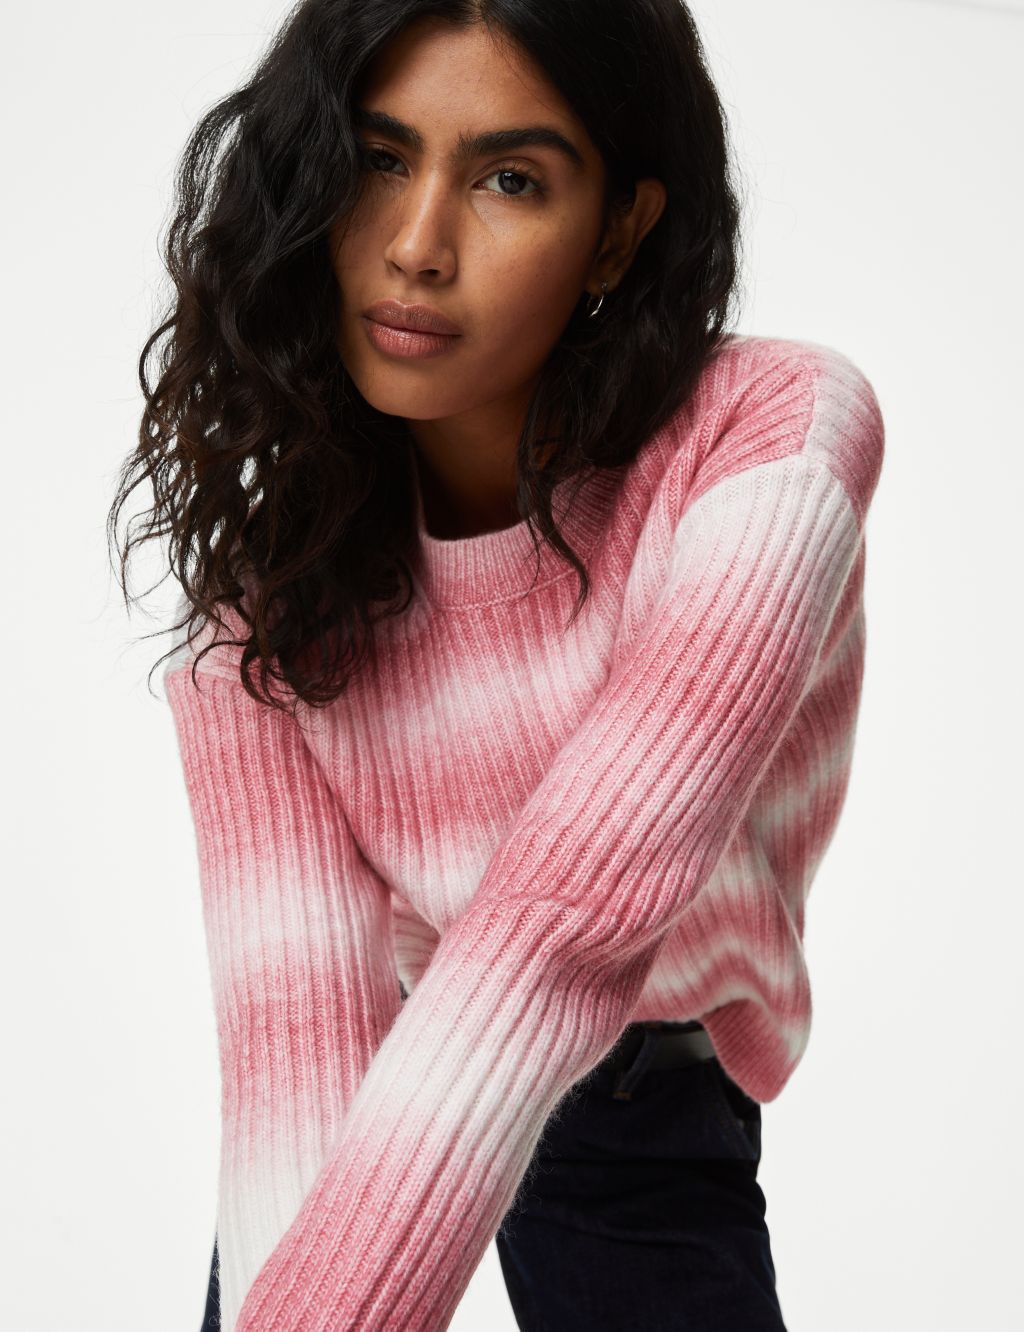 Cloud-Yarn Ombre Striped Crew Neck Jumper image 4